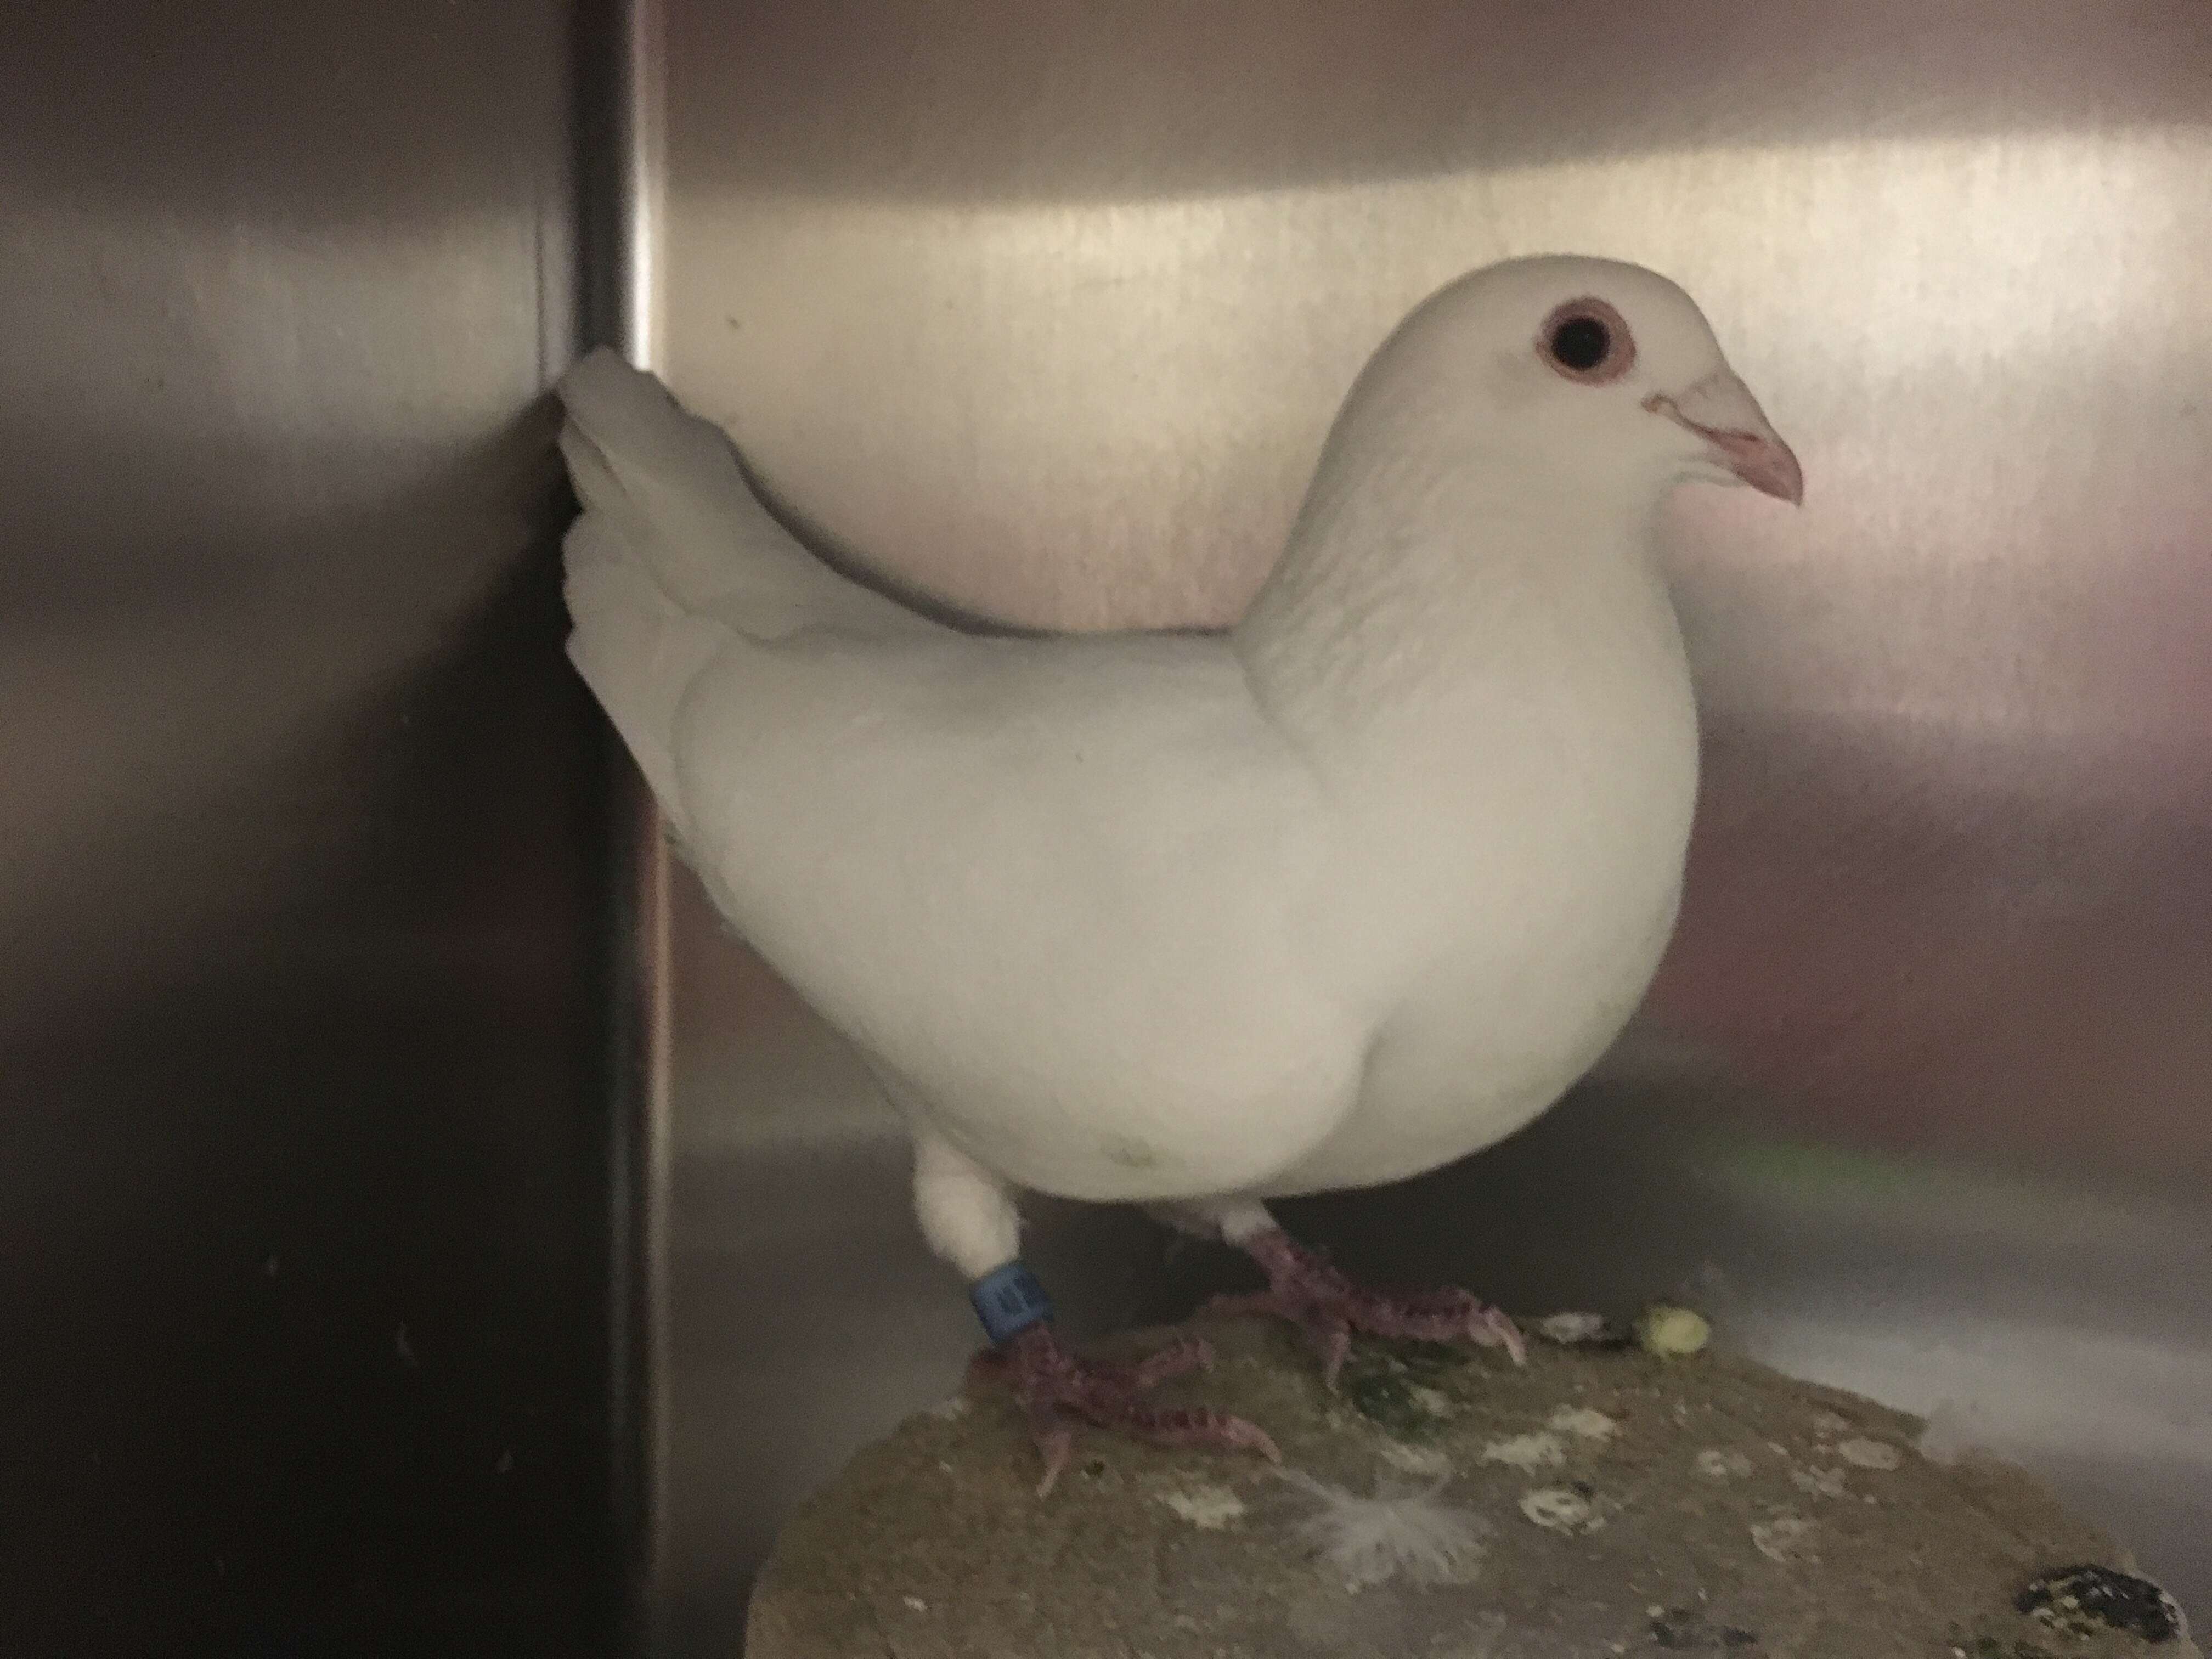 'Wedding dove' who ended up in shelter